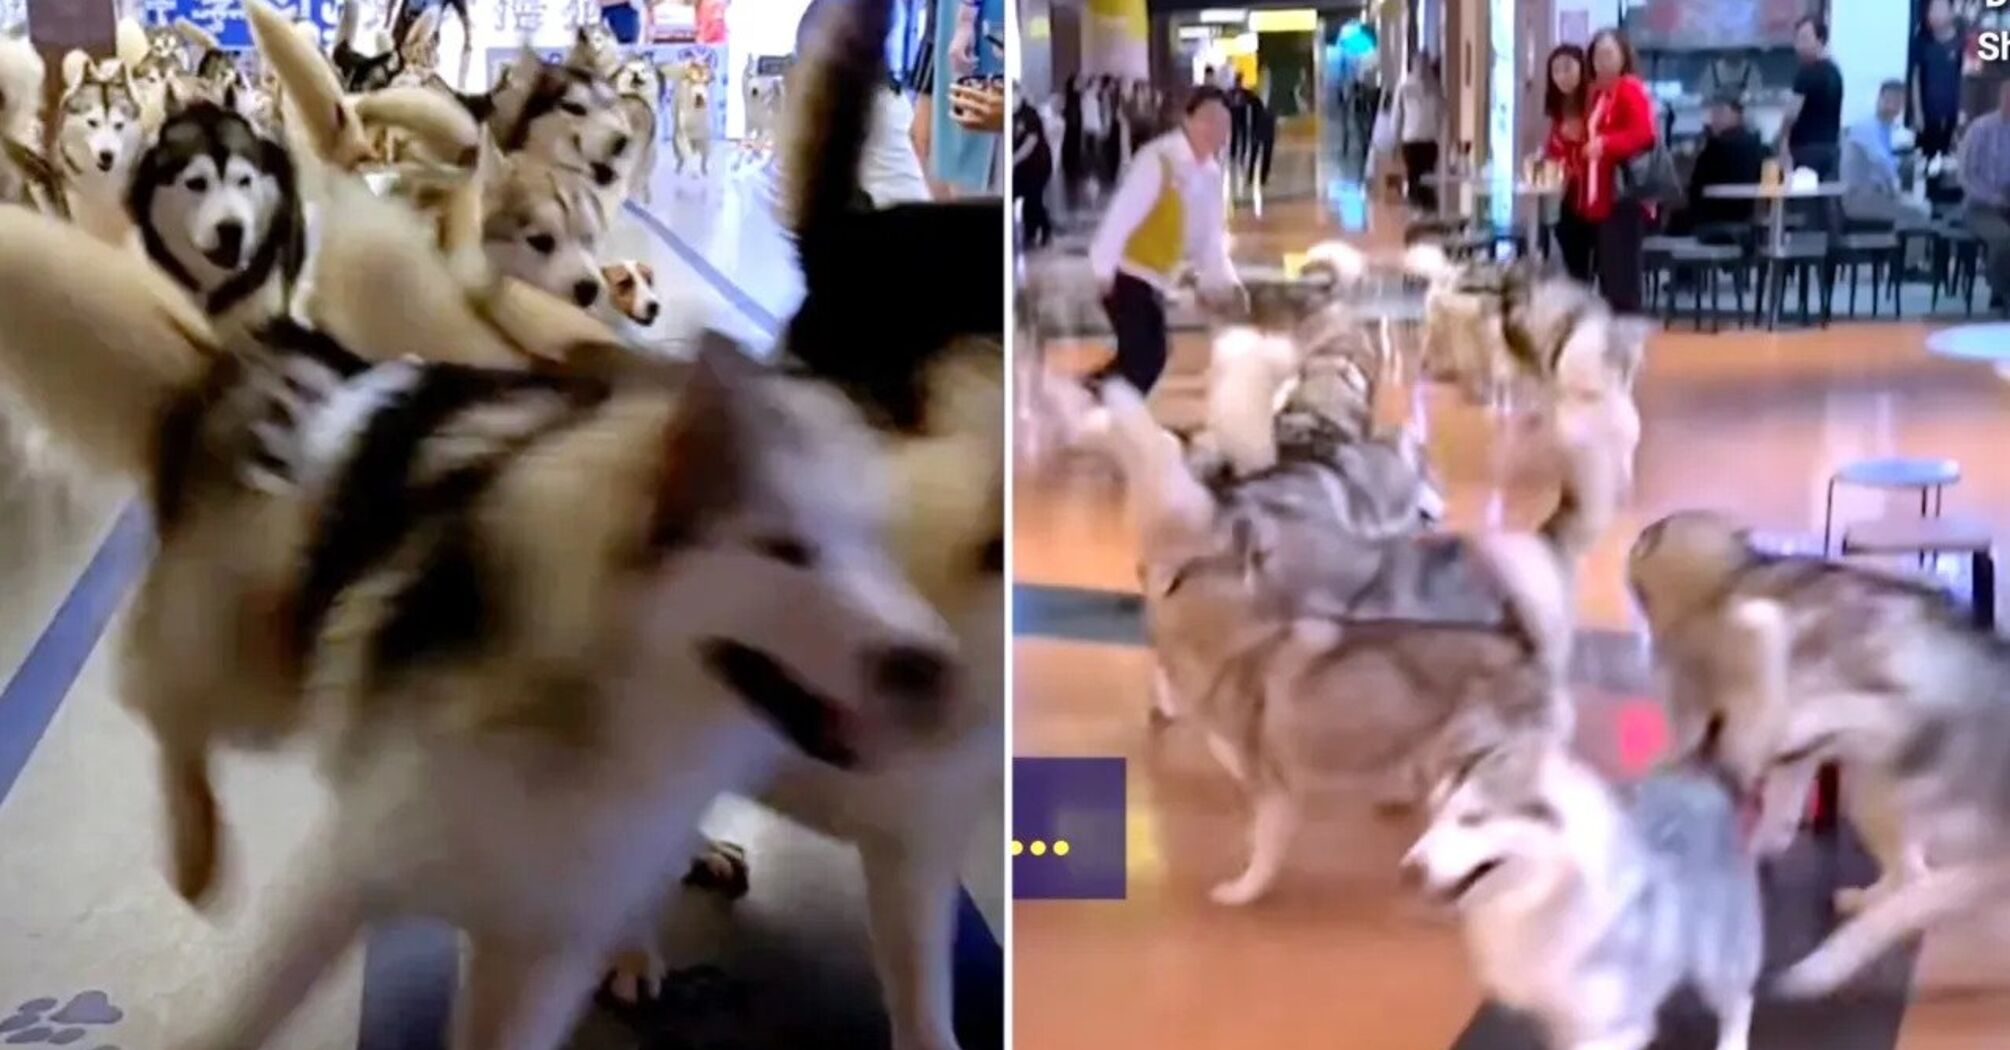 100 huskies escaped from the zoo café and wreaked havoc in the shopping center